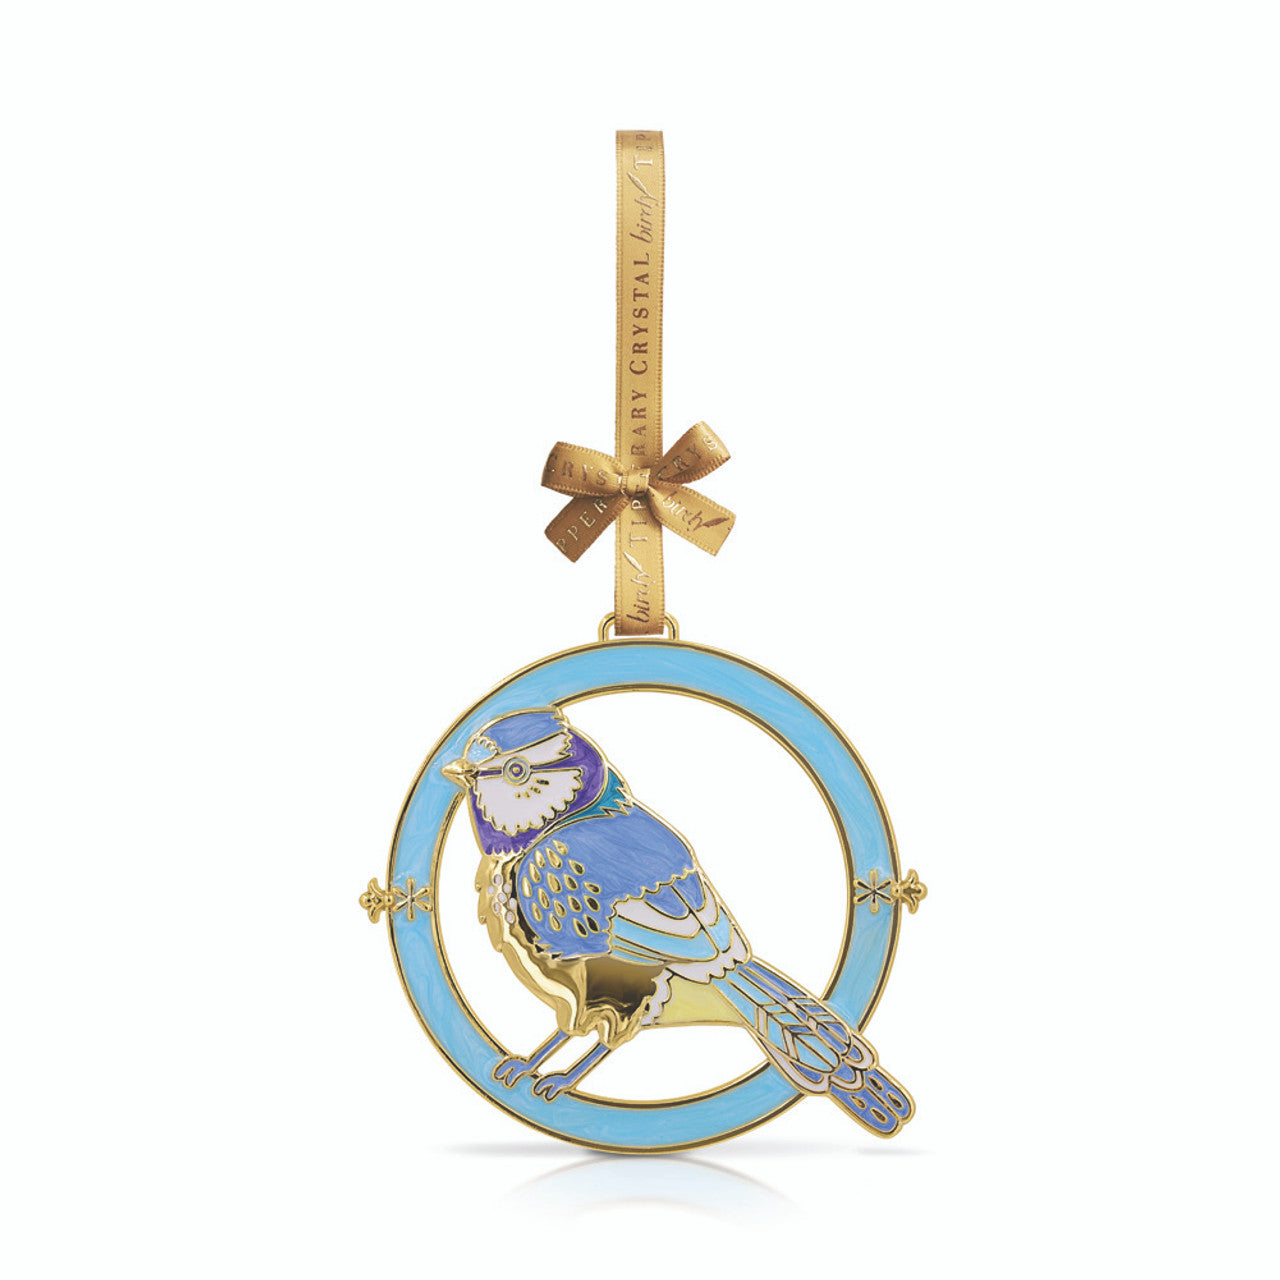 Tipperary Crystal Birdy Hanging Decoration Birdy - Blue Tit  We just Love Christmas! The festive season, the giving of gifts, creating memories and being together with family and loved ones. Have lots of fun with our lovingly designed and created Christmas decorations, each one has a magic sparkle of elf dust!